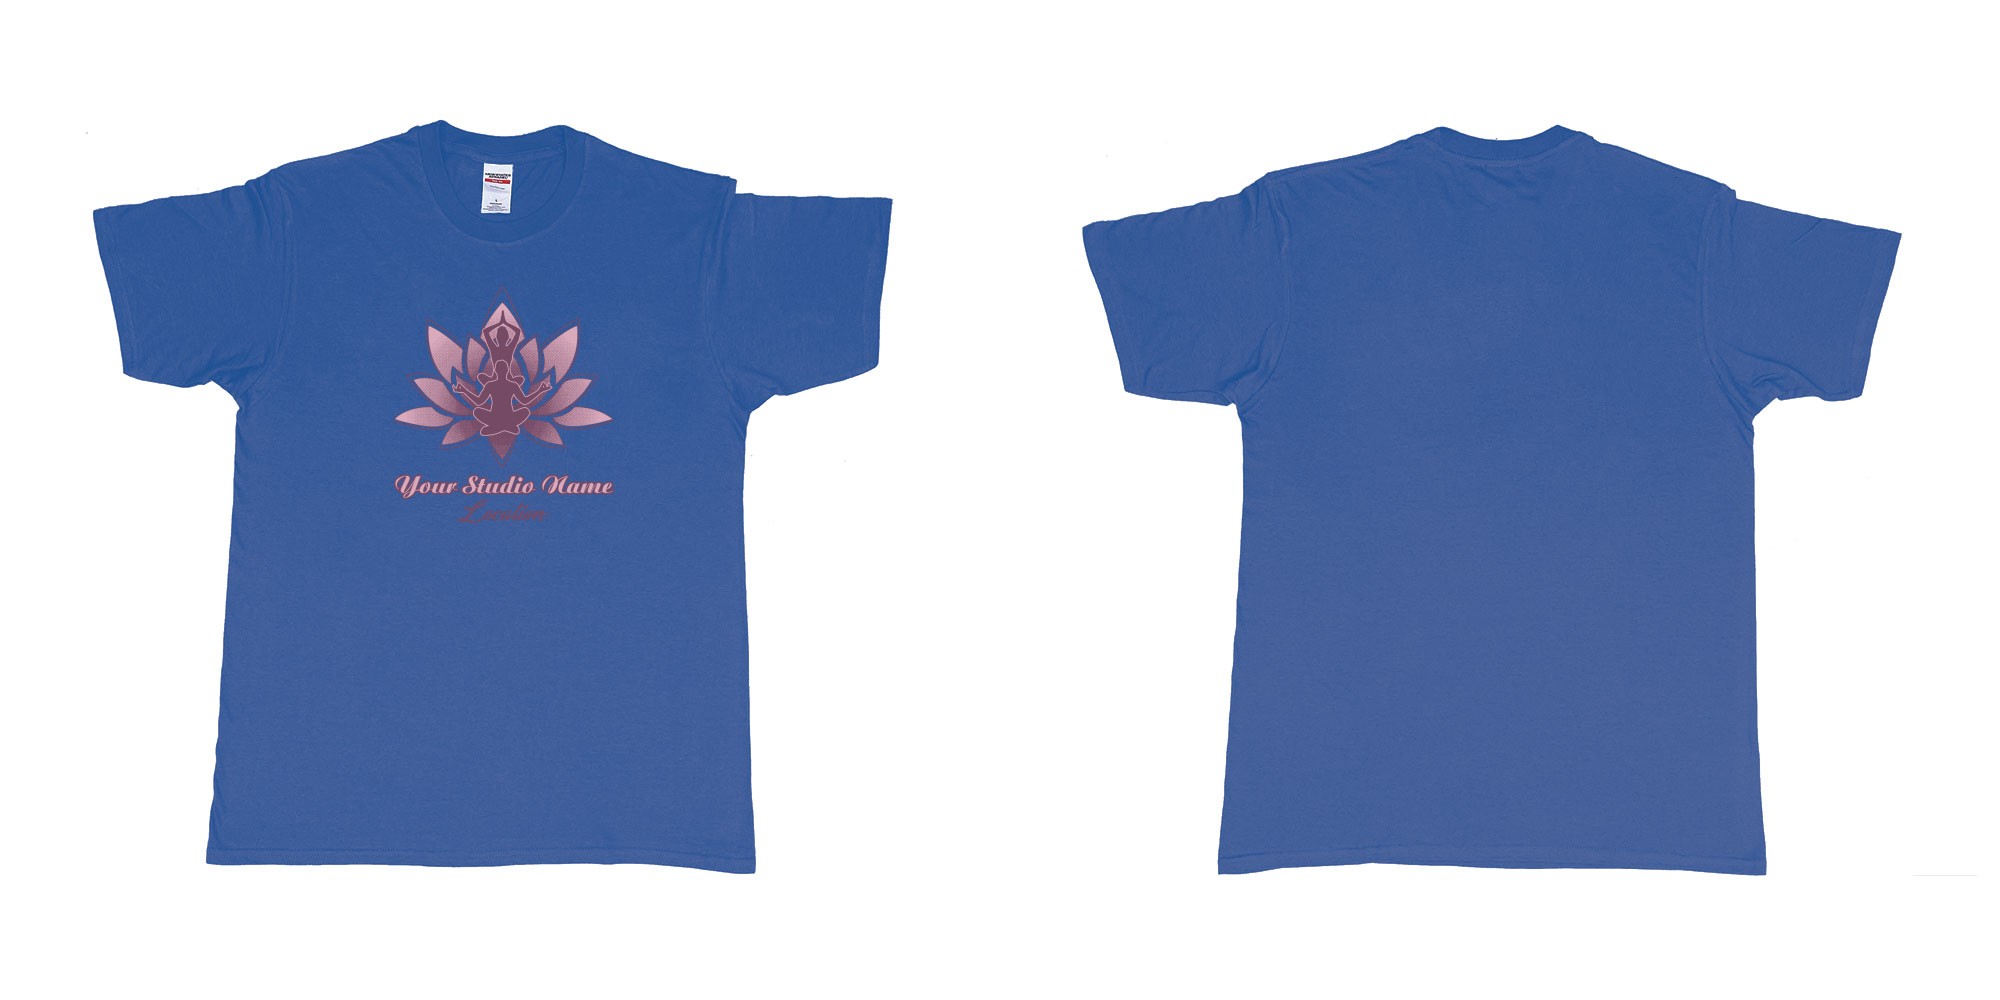 Custom tshirt design yoga meditation lotus own studio t shirt screen printing bali in fabric color royal-blue choice your own text made in Bali by The Pirate Way